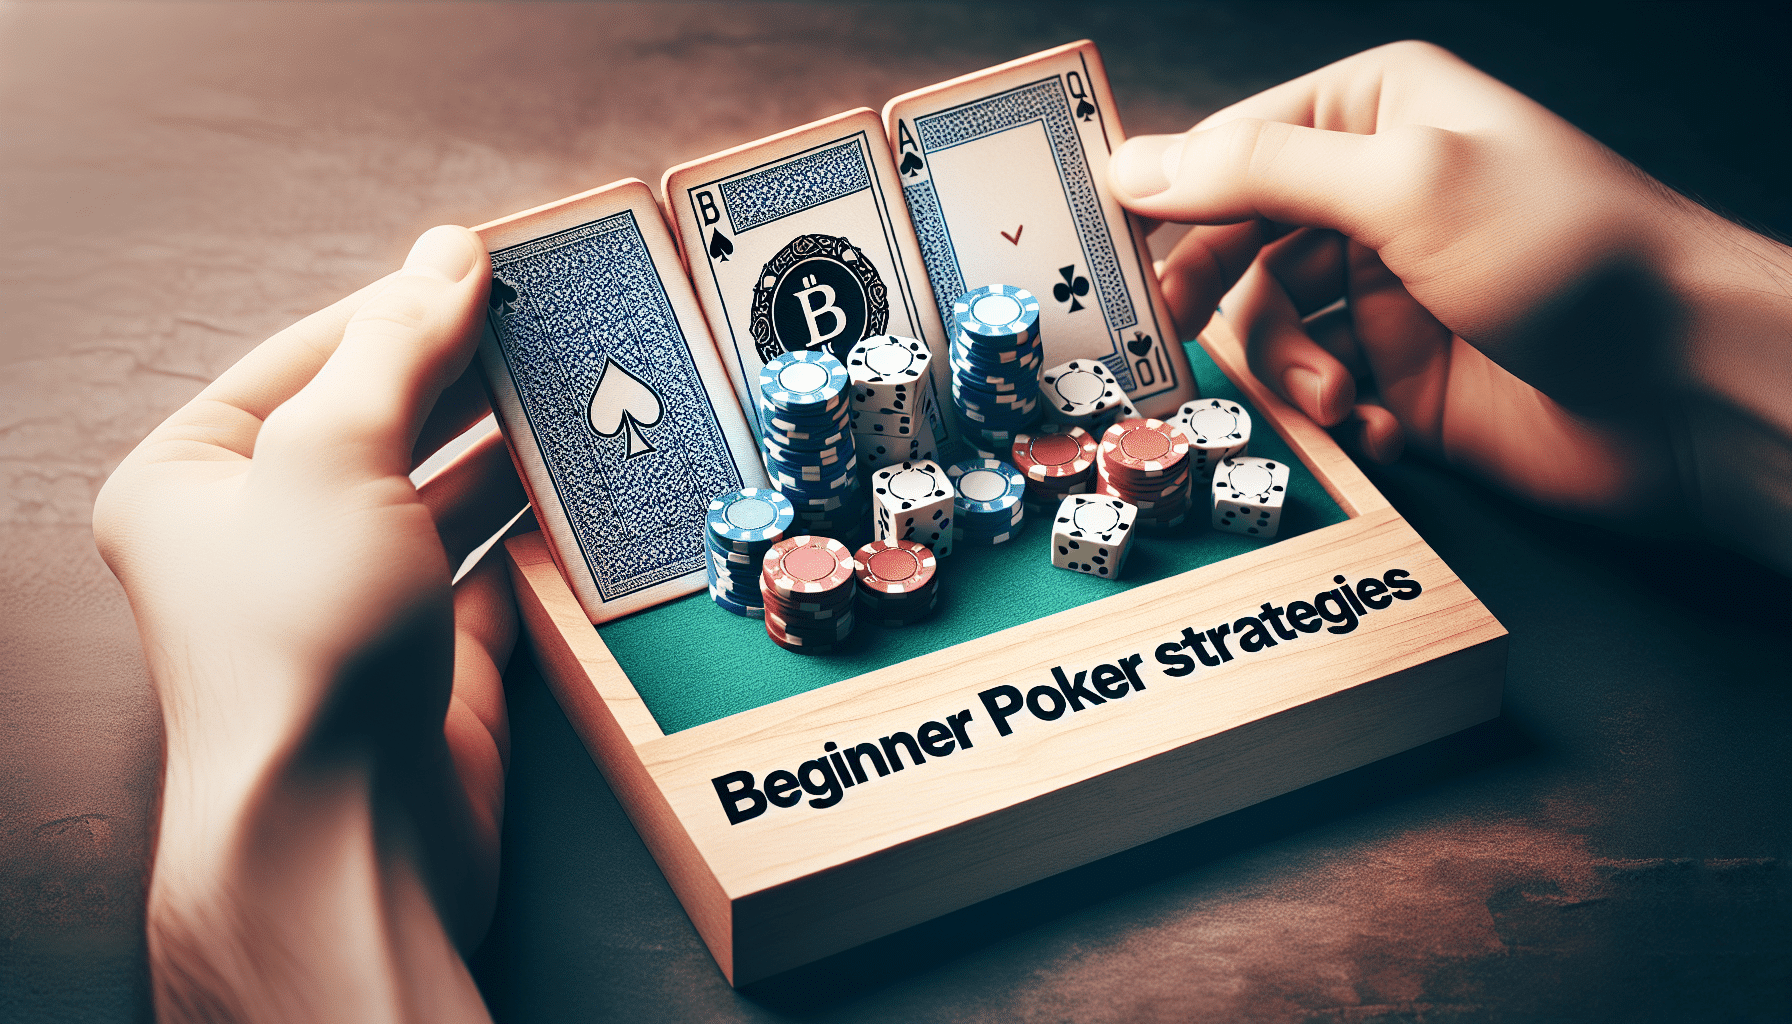 Poker Strategies For Beginners: How To Play And Win At Poker